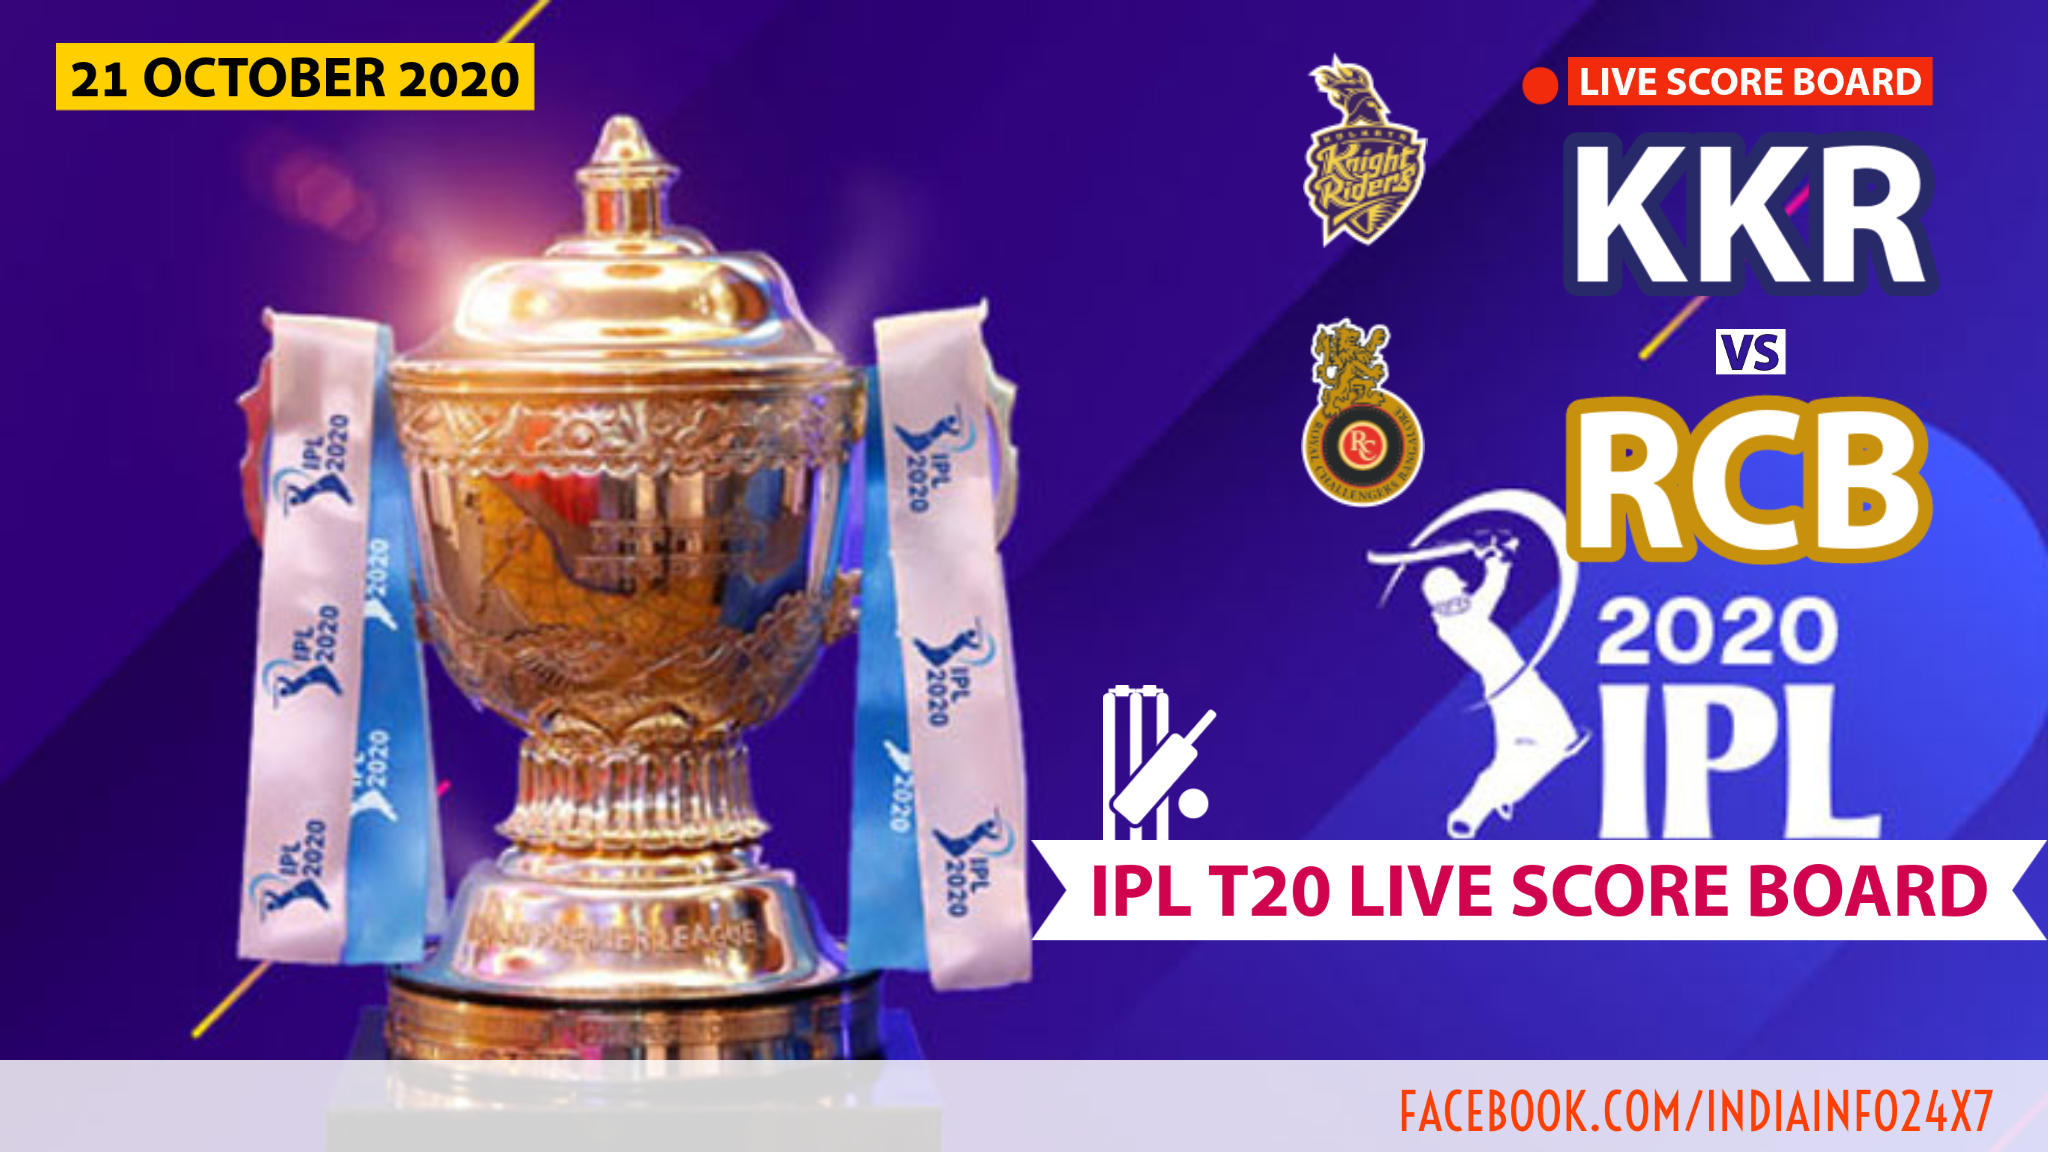 ipl cricket live score board today Match 39 KKR vs RCB Who will